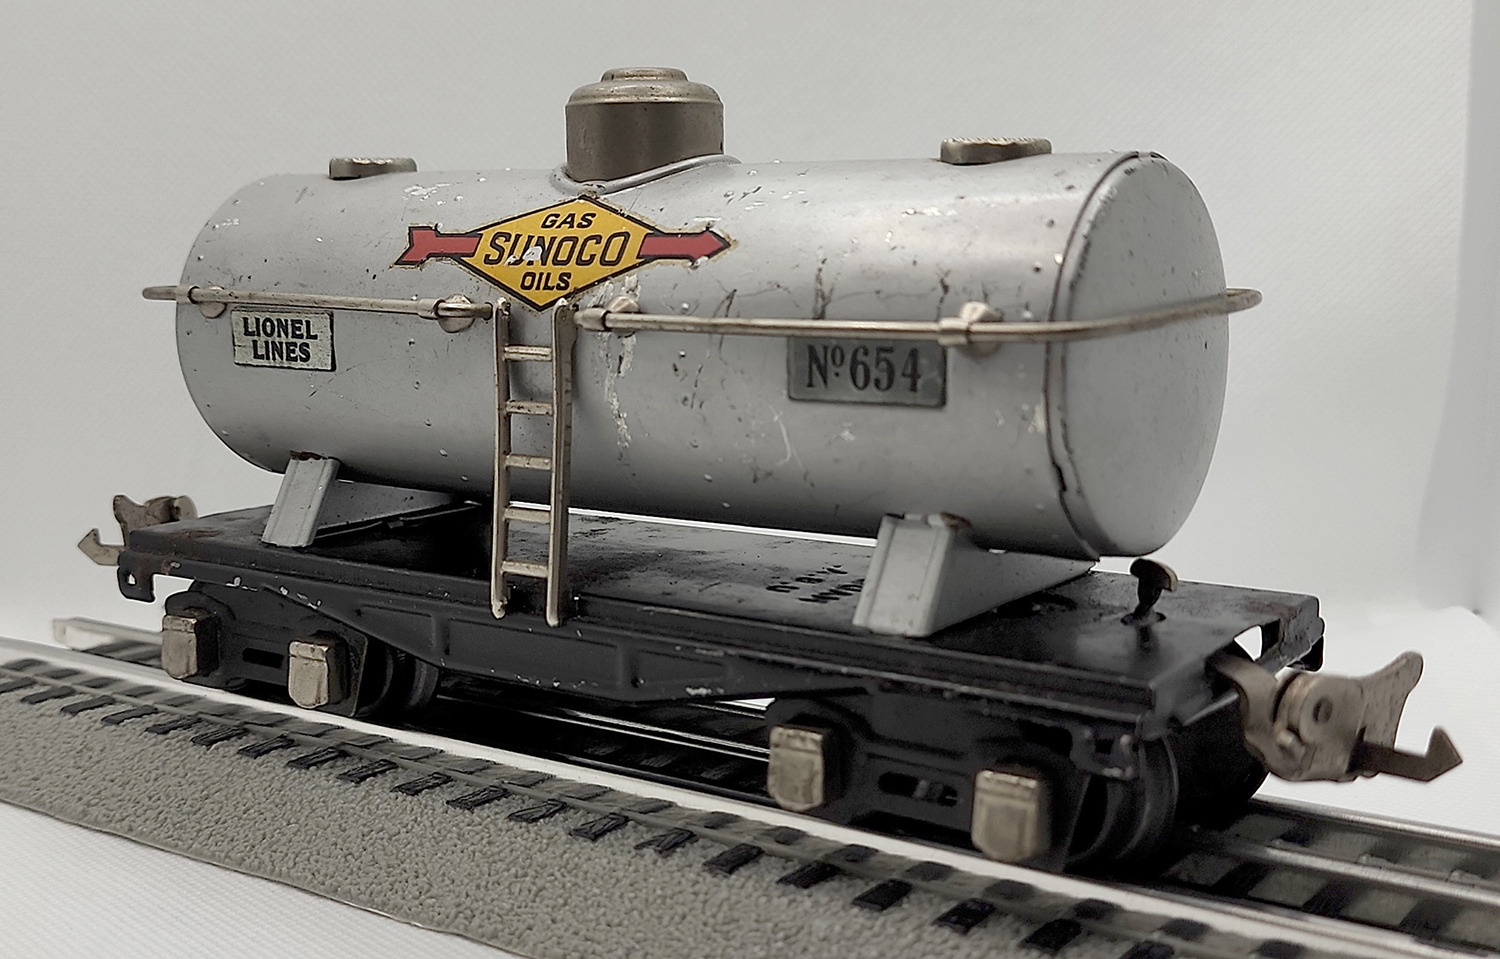 4th view of the Lionel Sunoco Single-Dome #654 Tankcar in my O-scale Collection